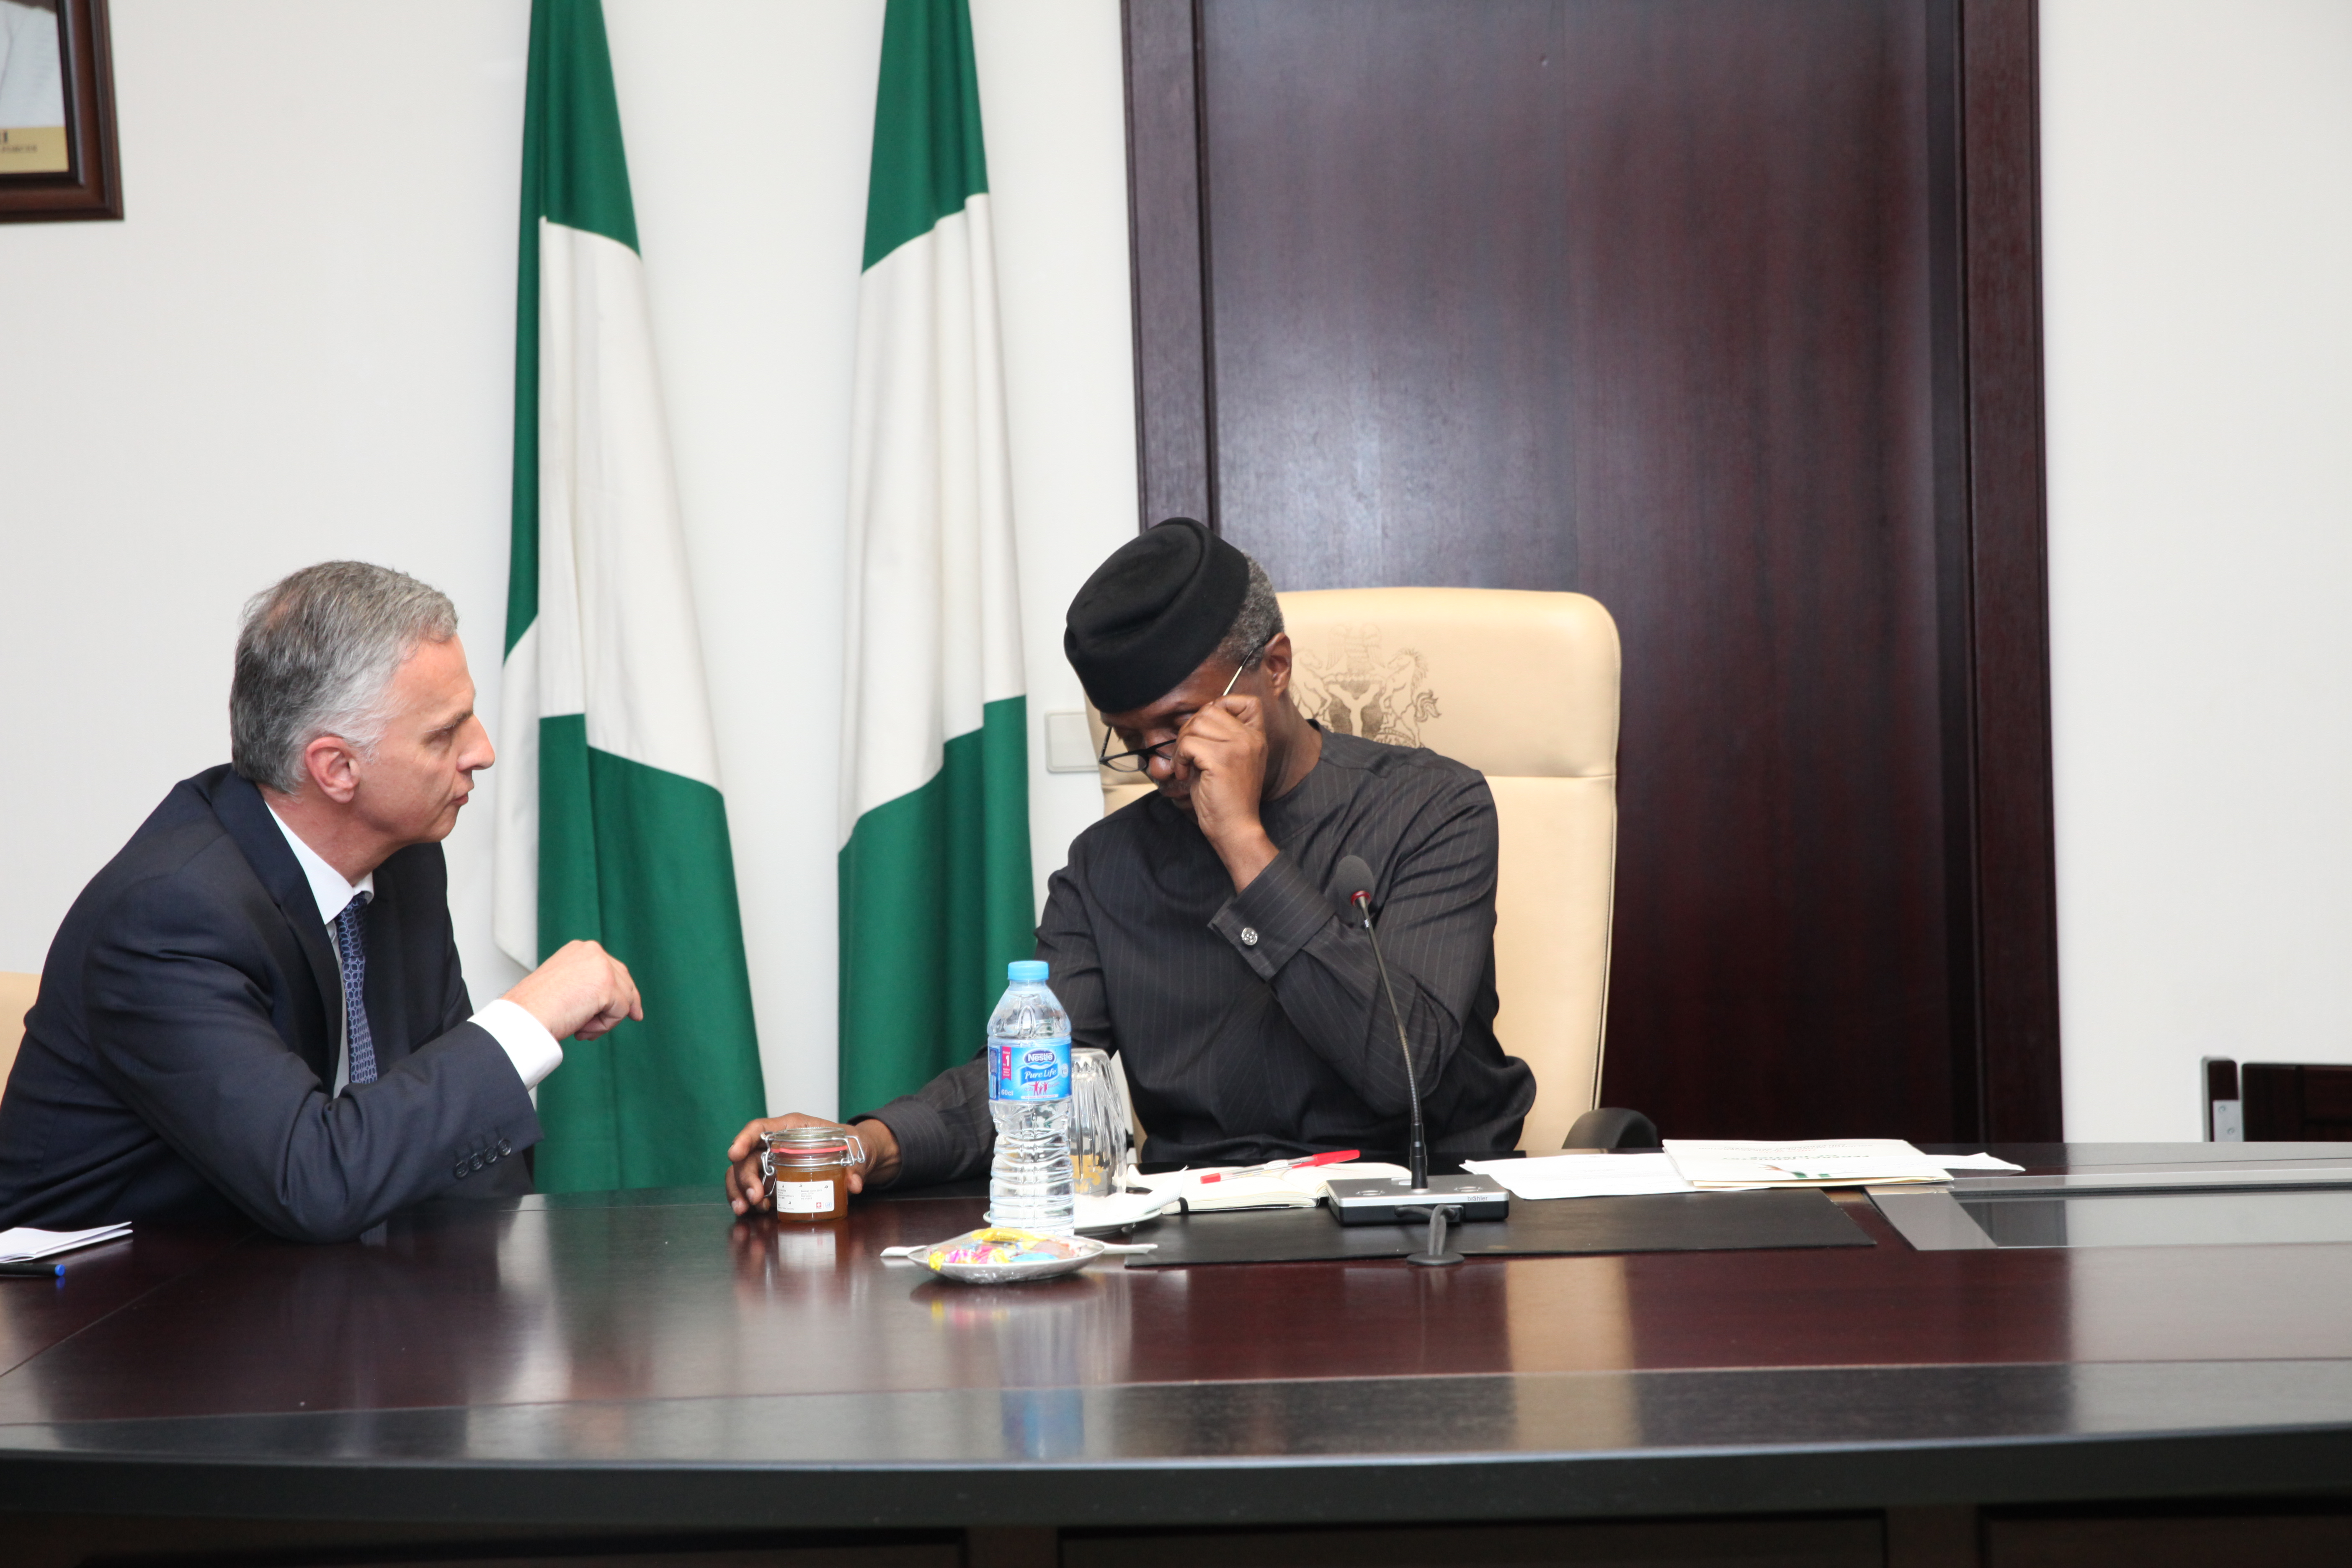 VP Osinbajo Meets With Didier Burkhalter, Head Of SWISS Federal Department Of Foreign Affairs On 08/03/2016